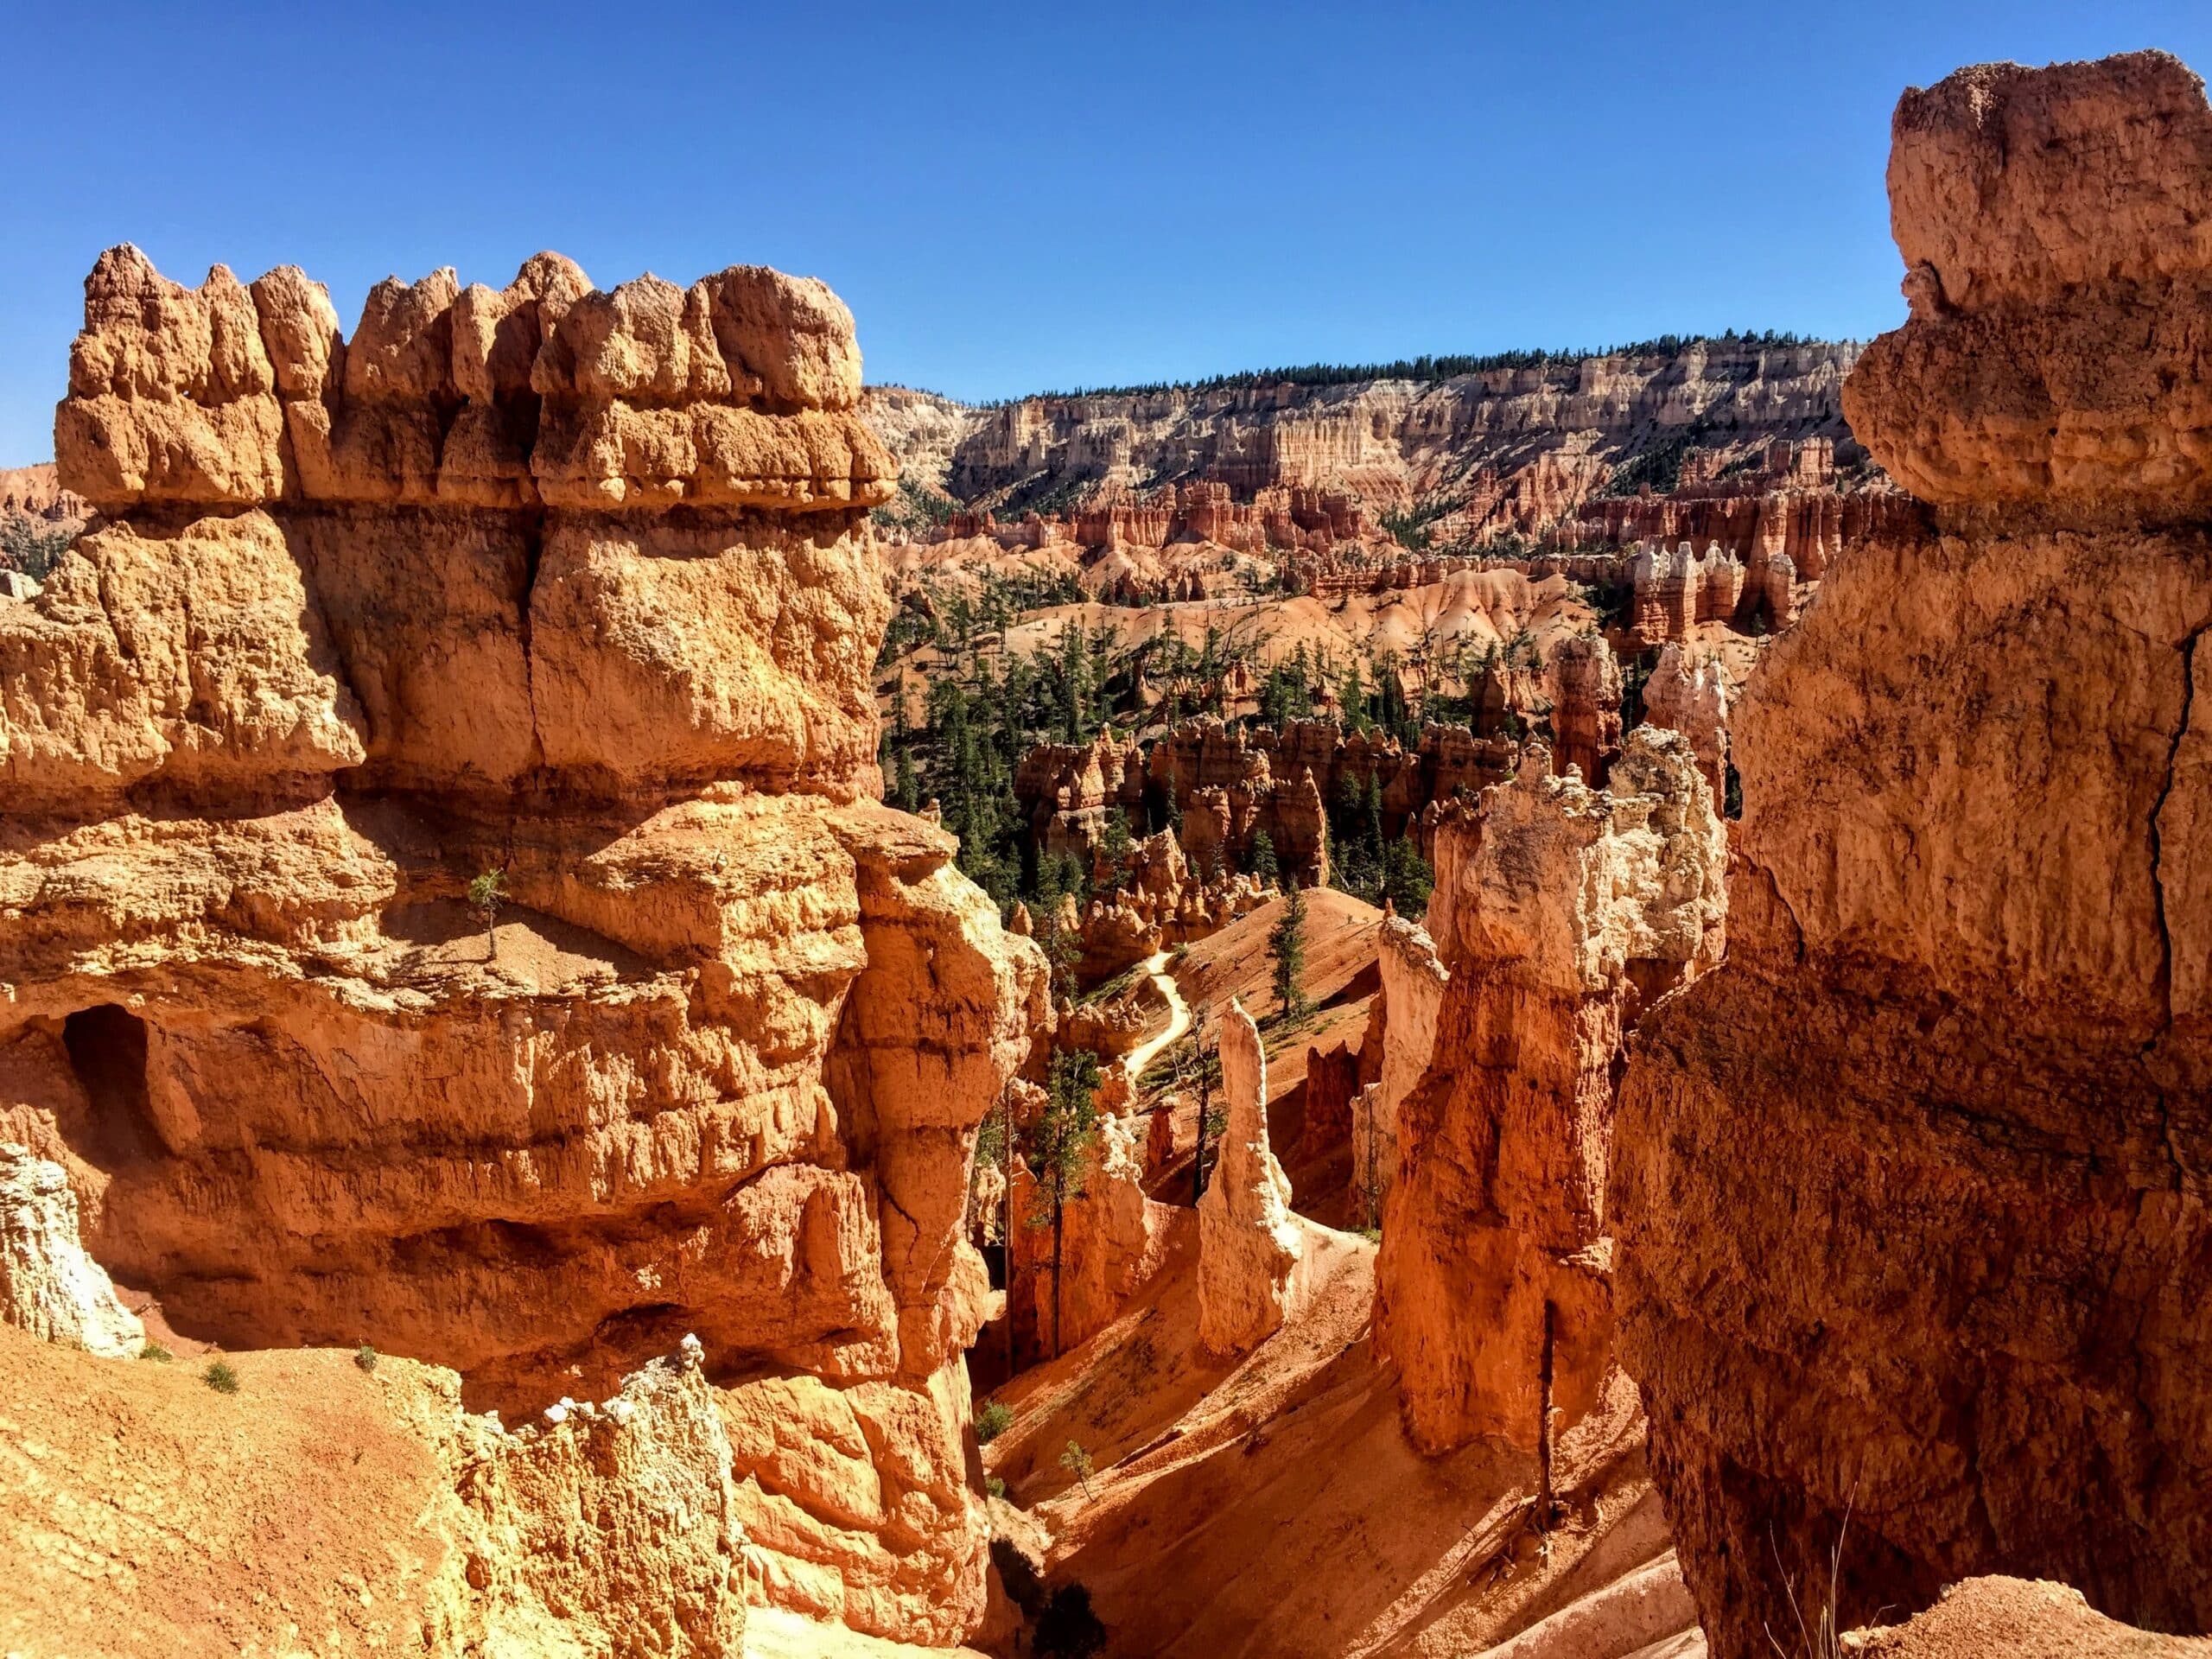 Overlooking Bryce canyon national park, one of Utah's Might Five.